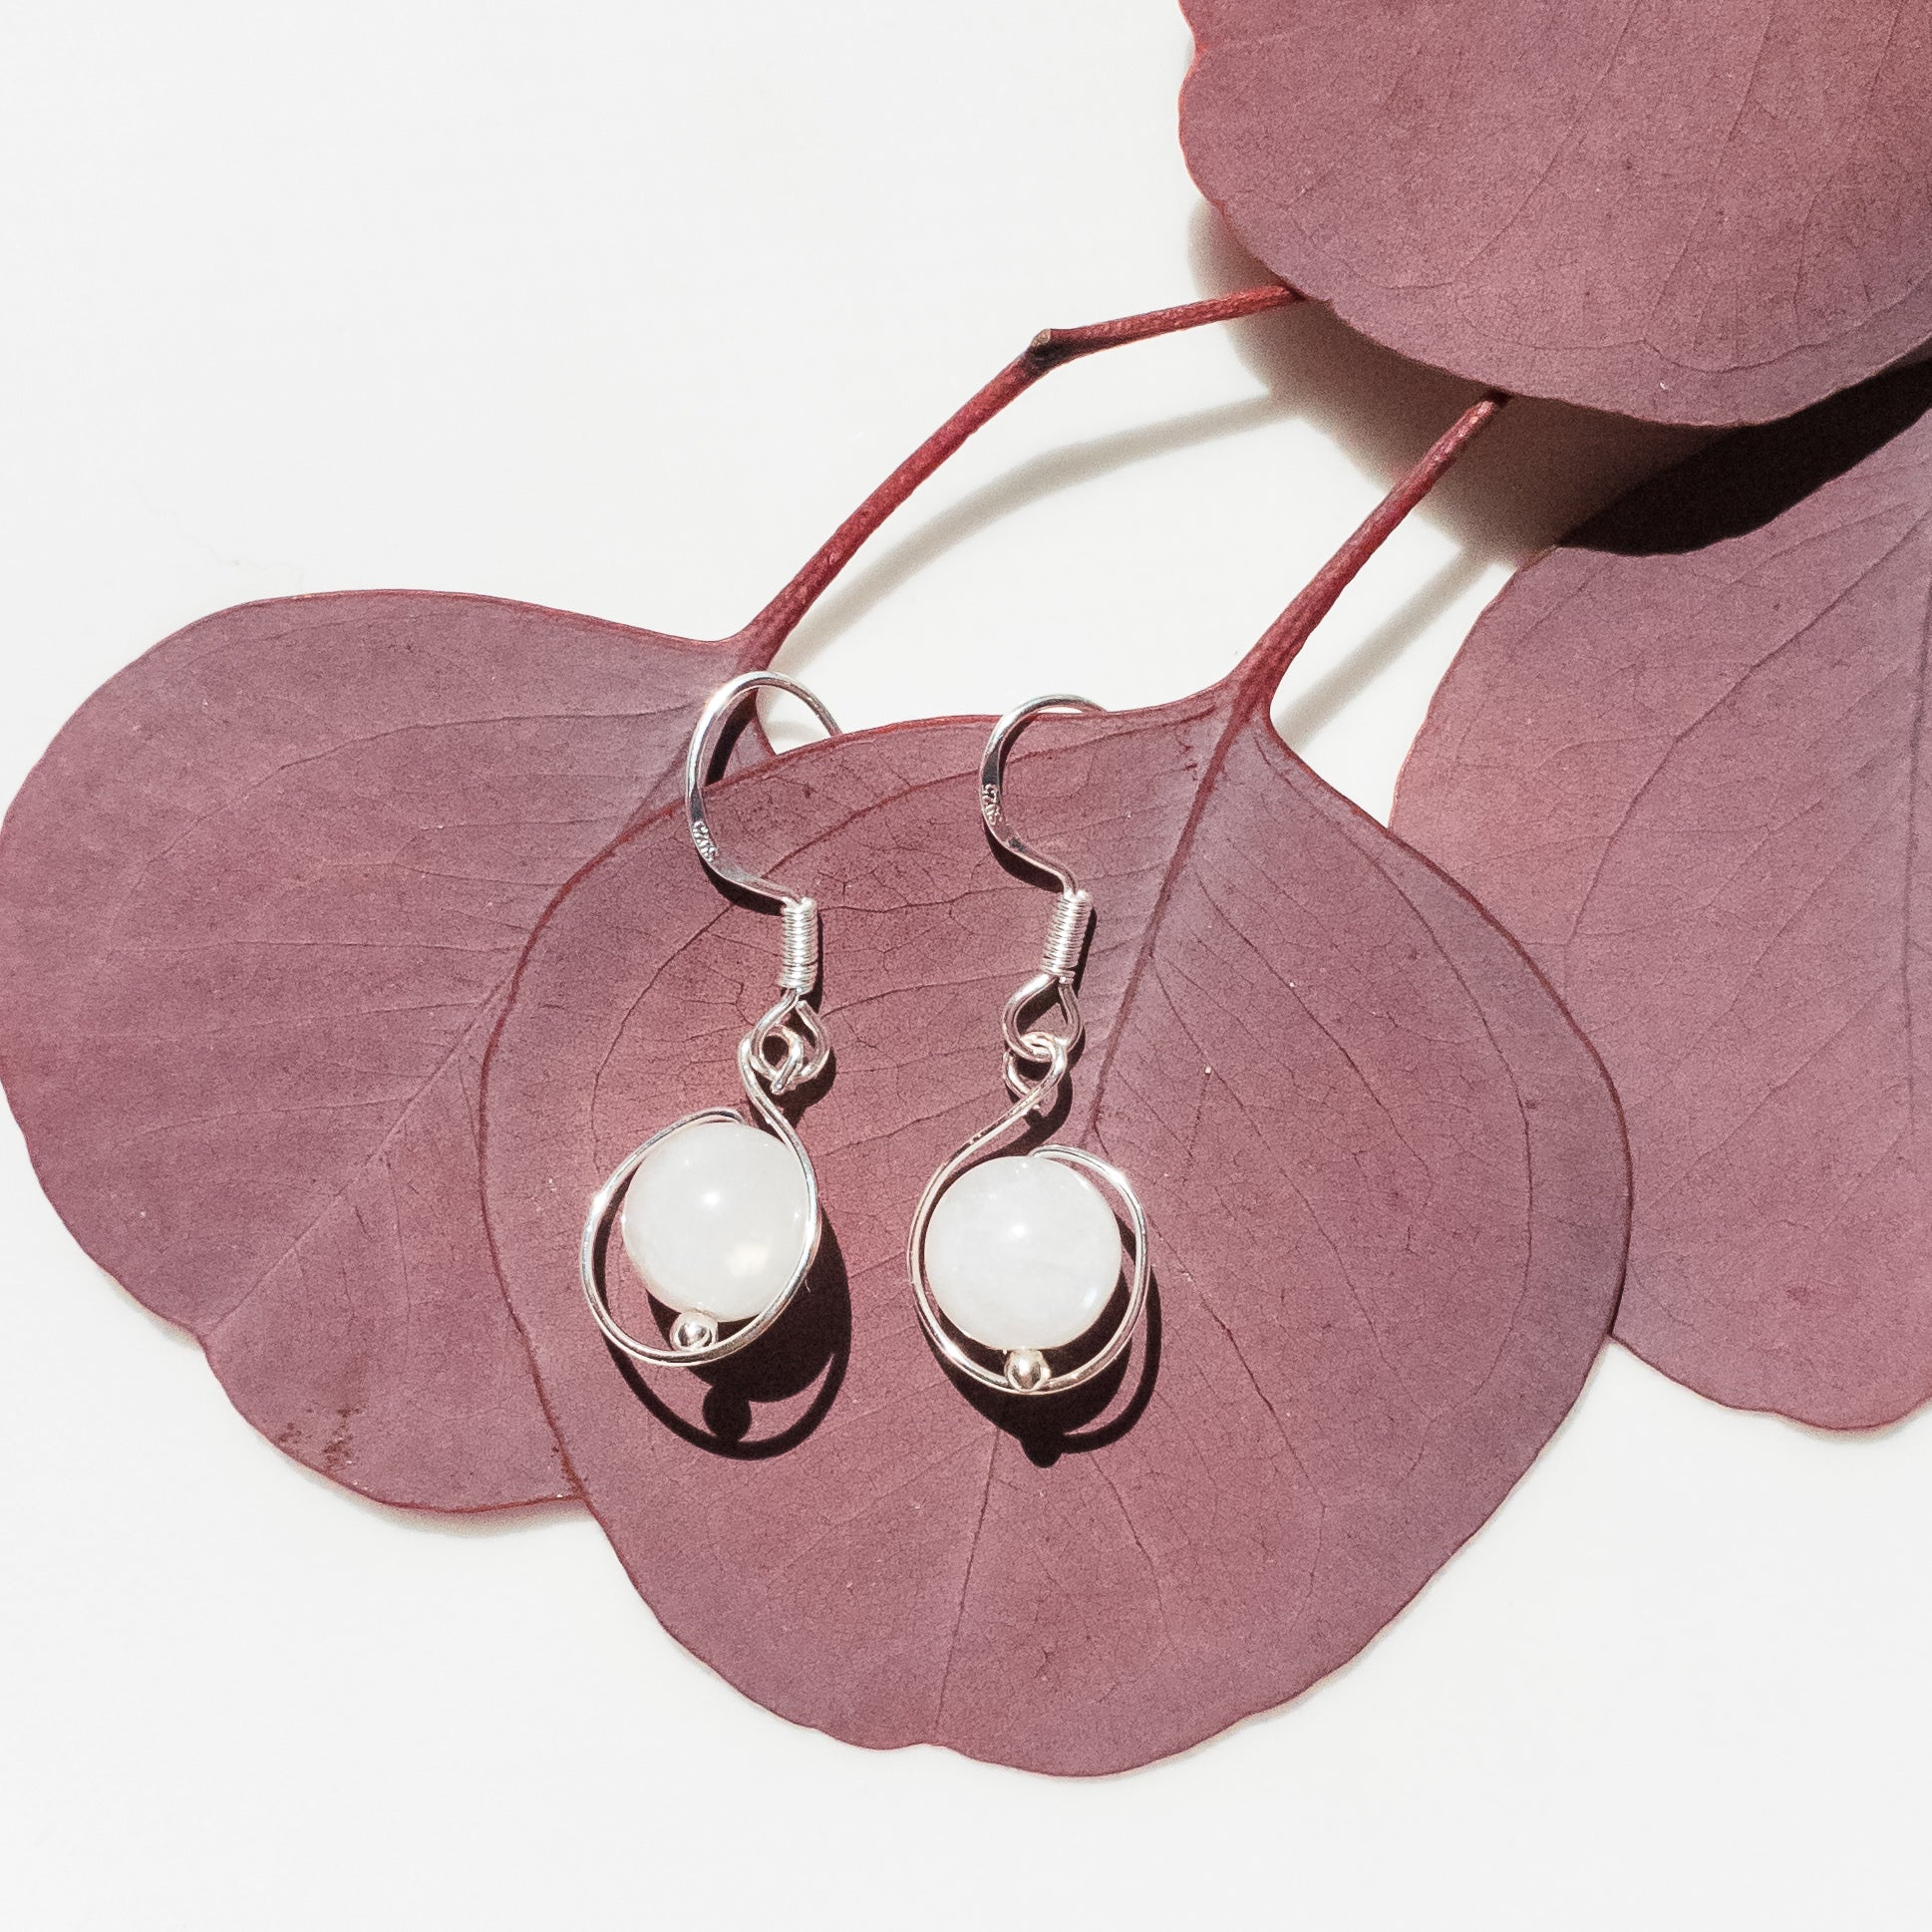 Celestial Collection - Moonstone Earrings in Sterling Silver - Close-up View - BellaChel Jeweler